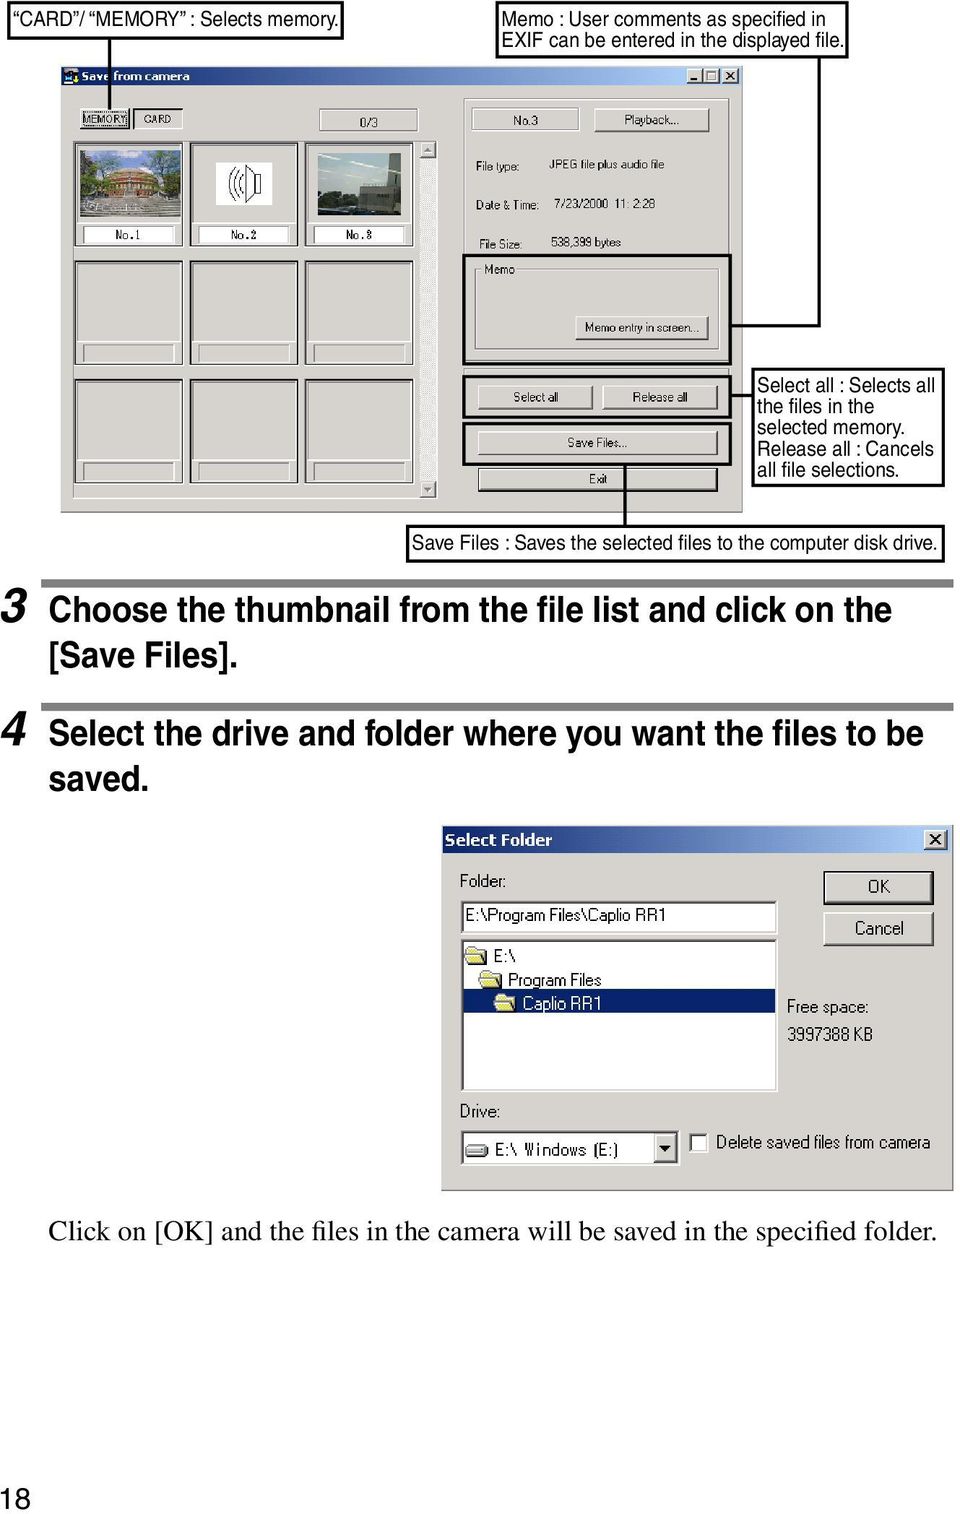 Save Files : Saves the selected files to the computer disk drive.